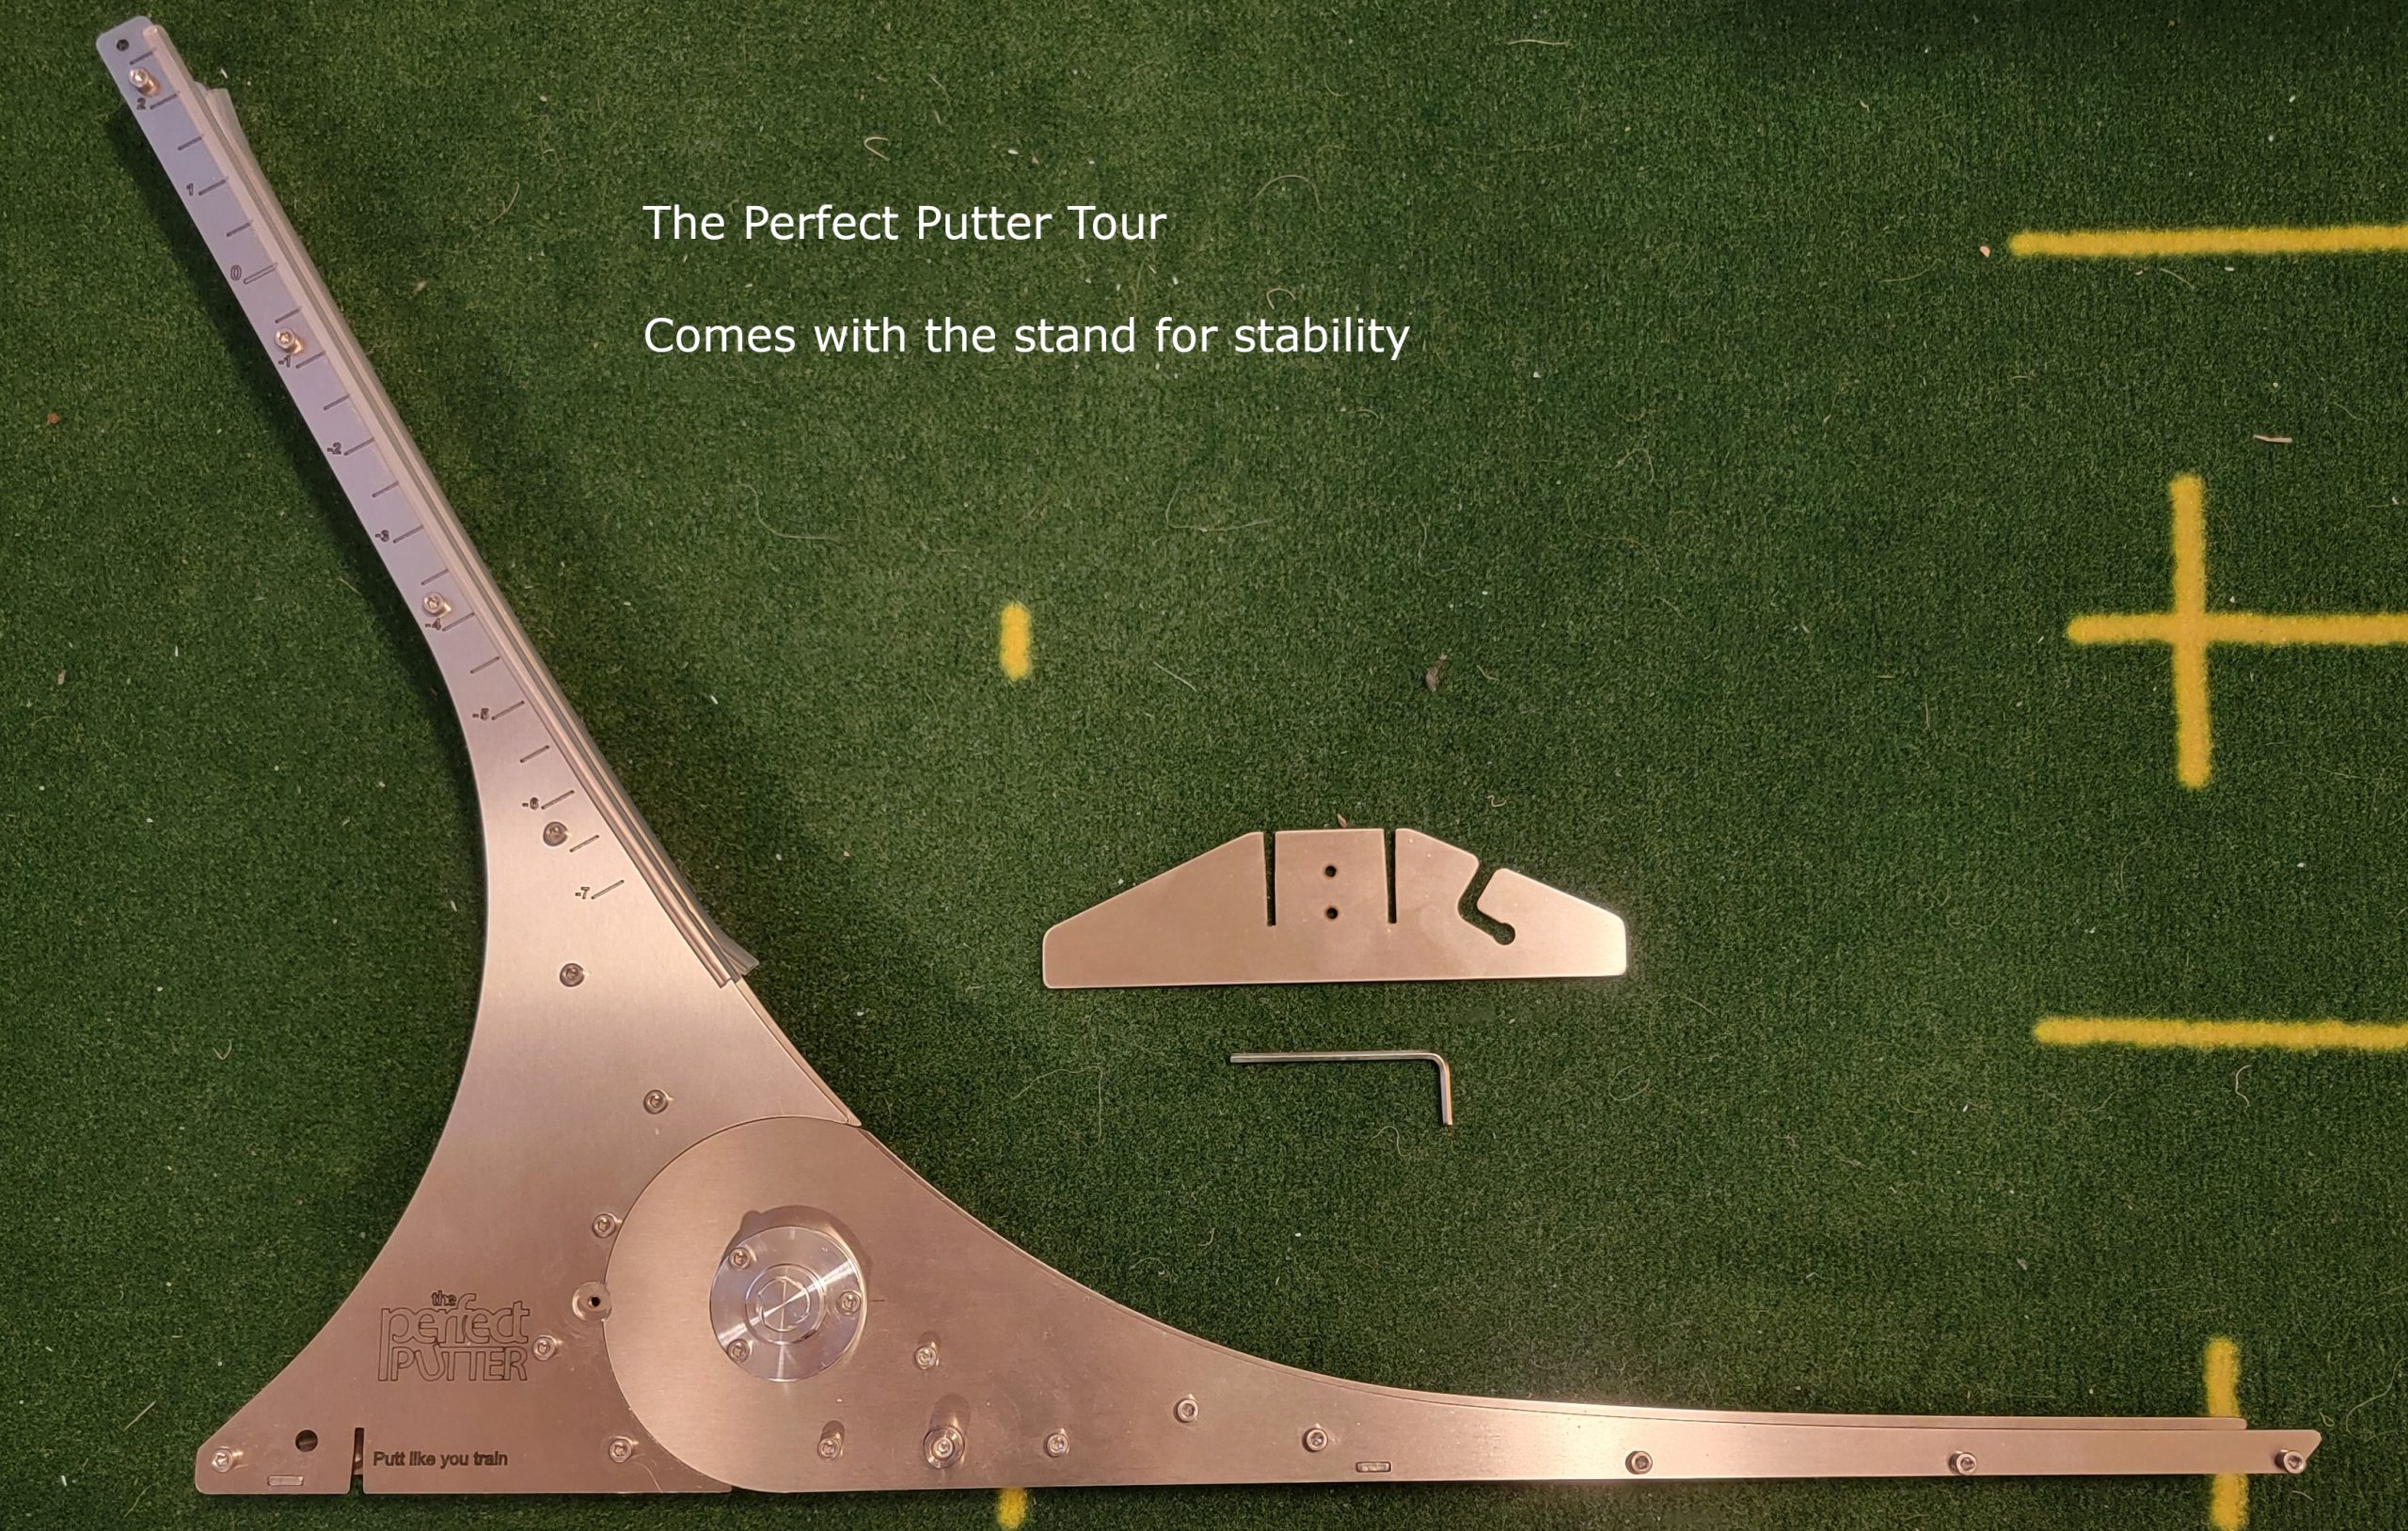 Old Duffer Golf image of tour model unfolded with stand